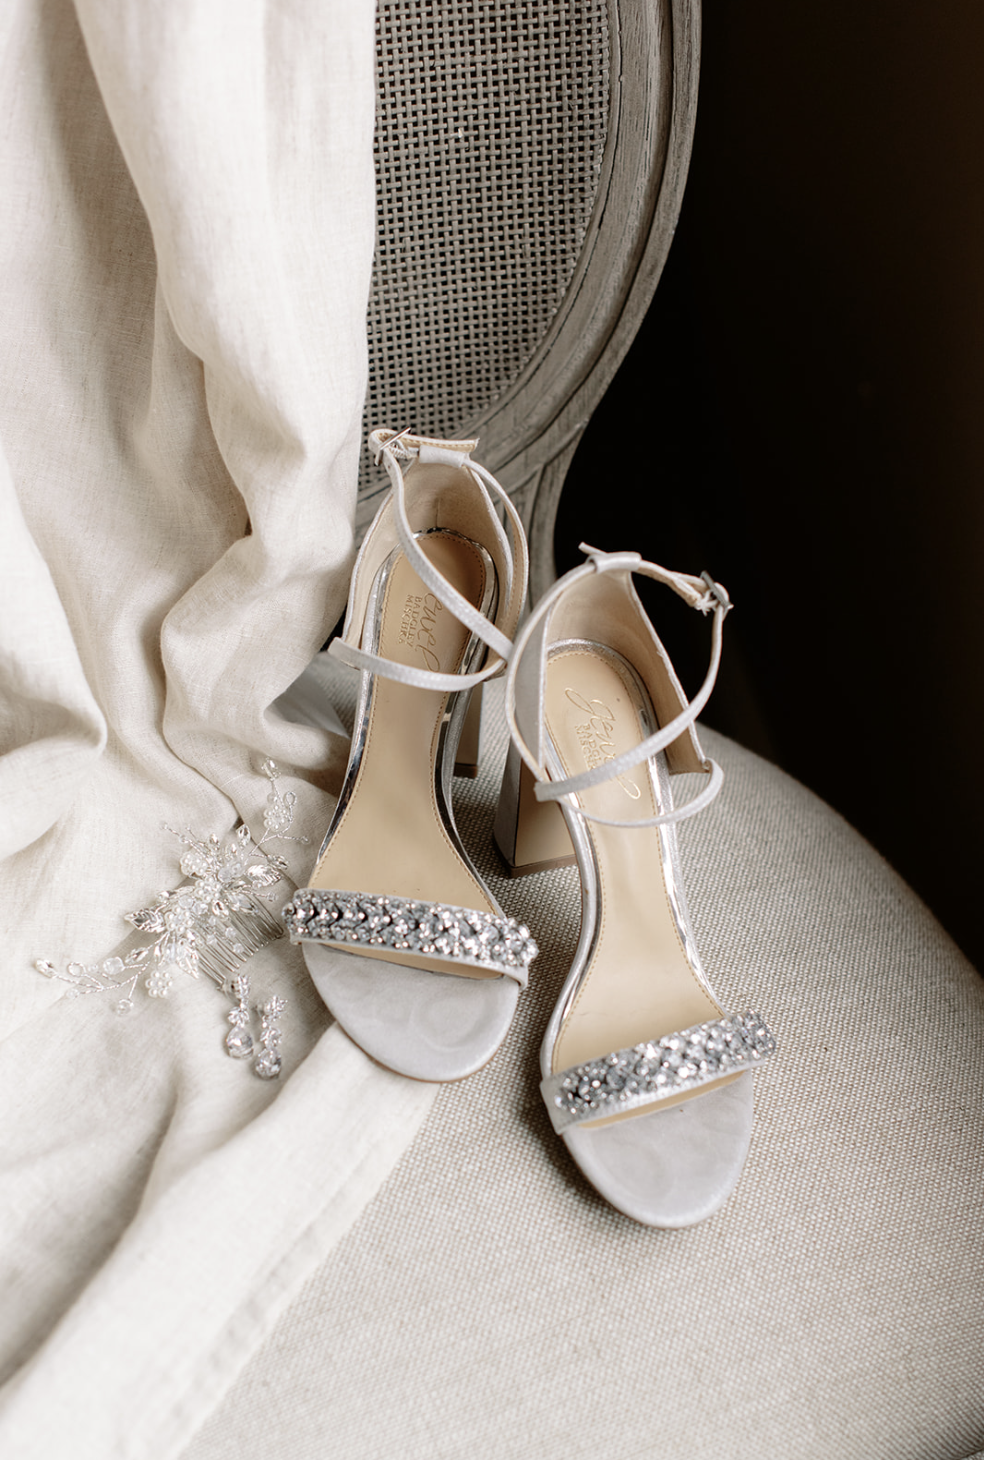 Elegant sparkly high heels are pictured with elegant bridal hair piece at Chicago wedding ceremony.